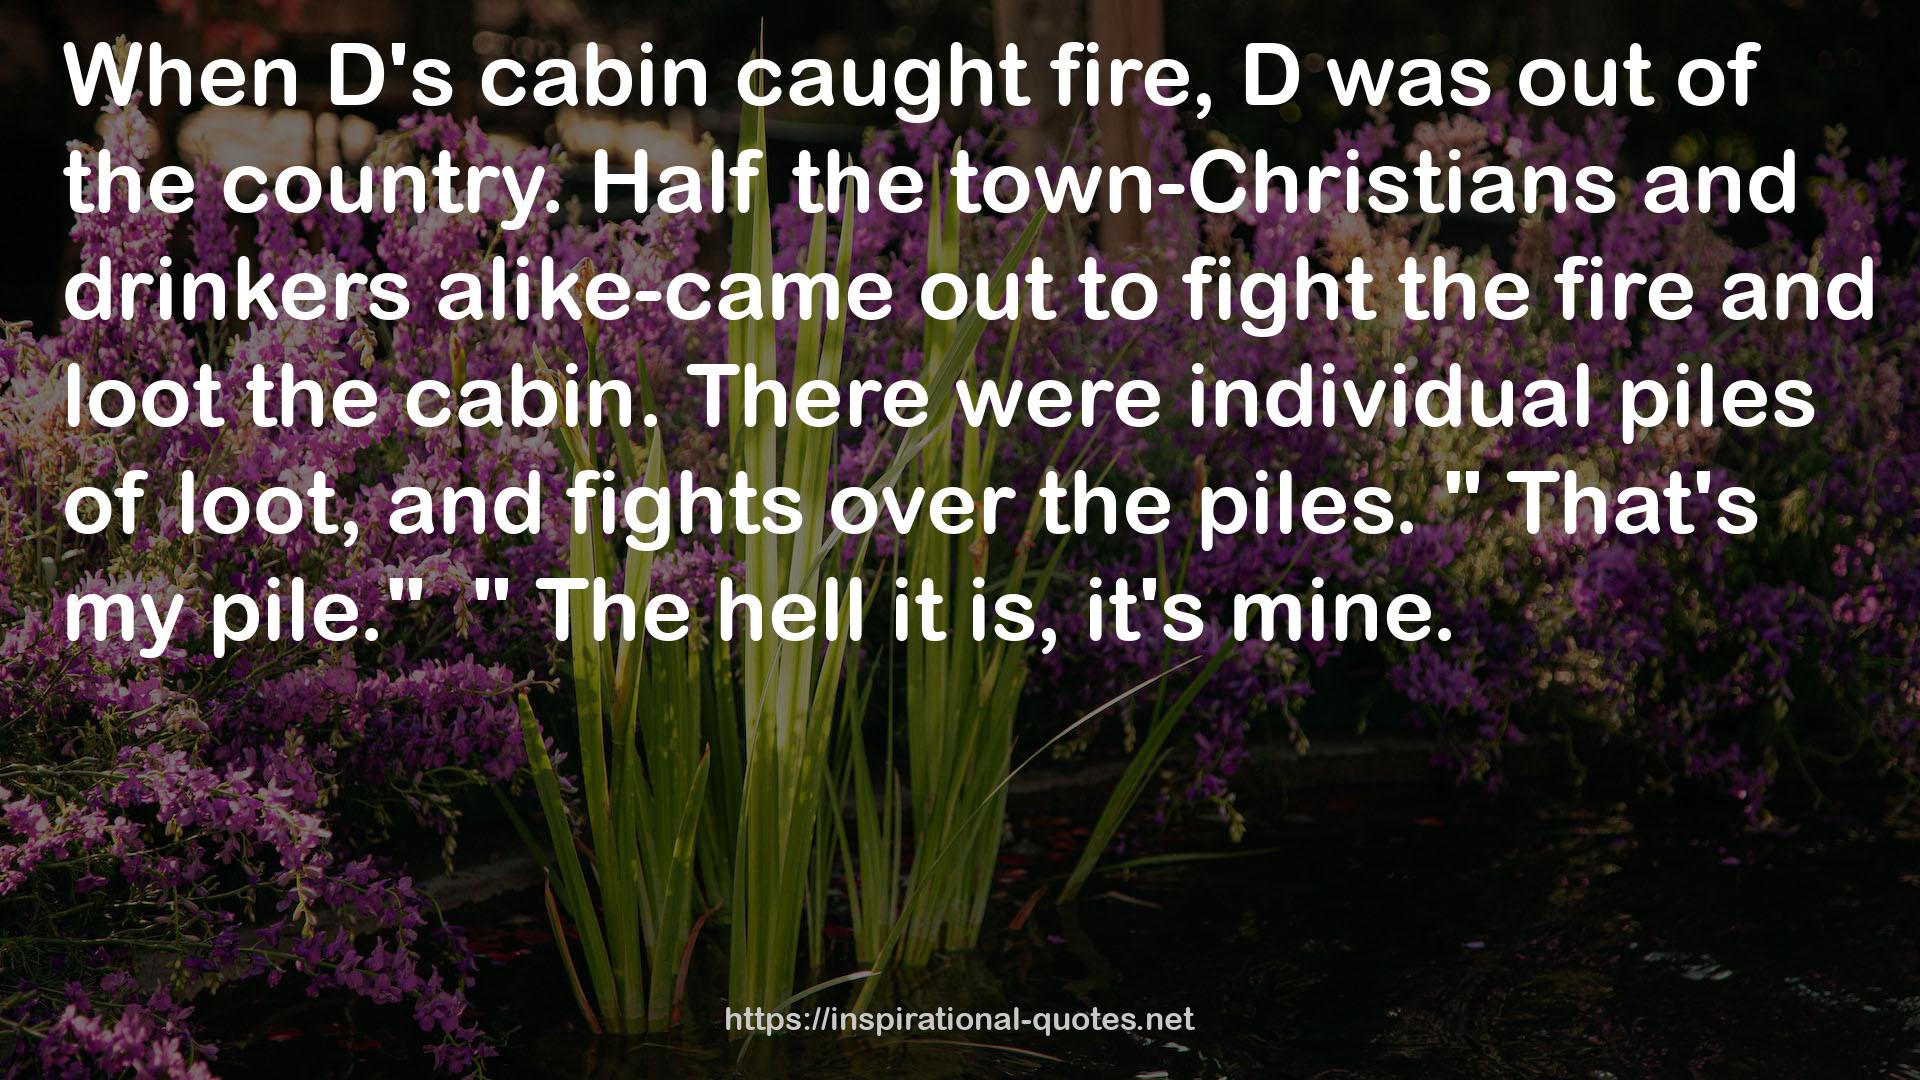 town-Christians  QUOTES